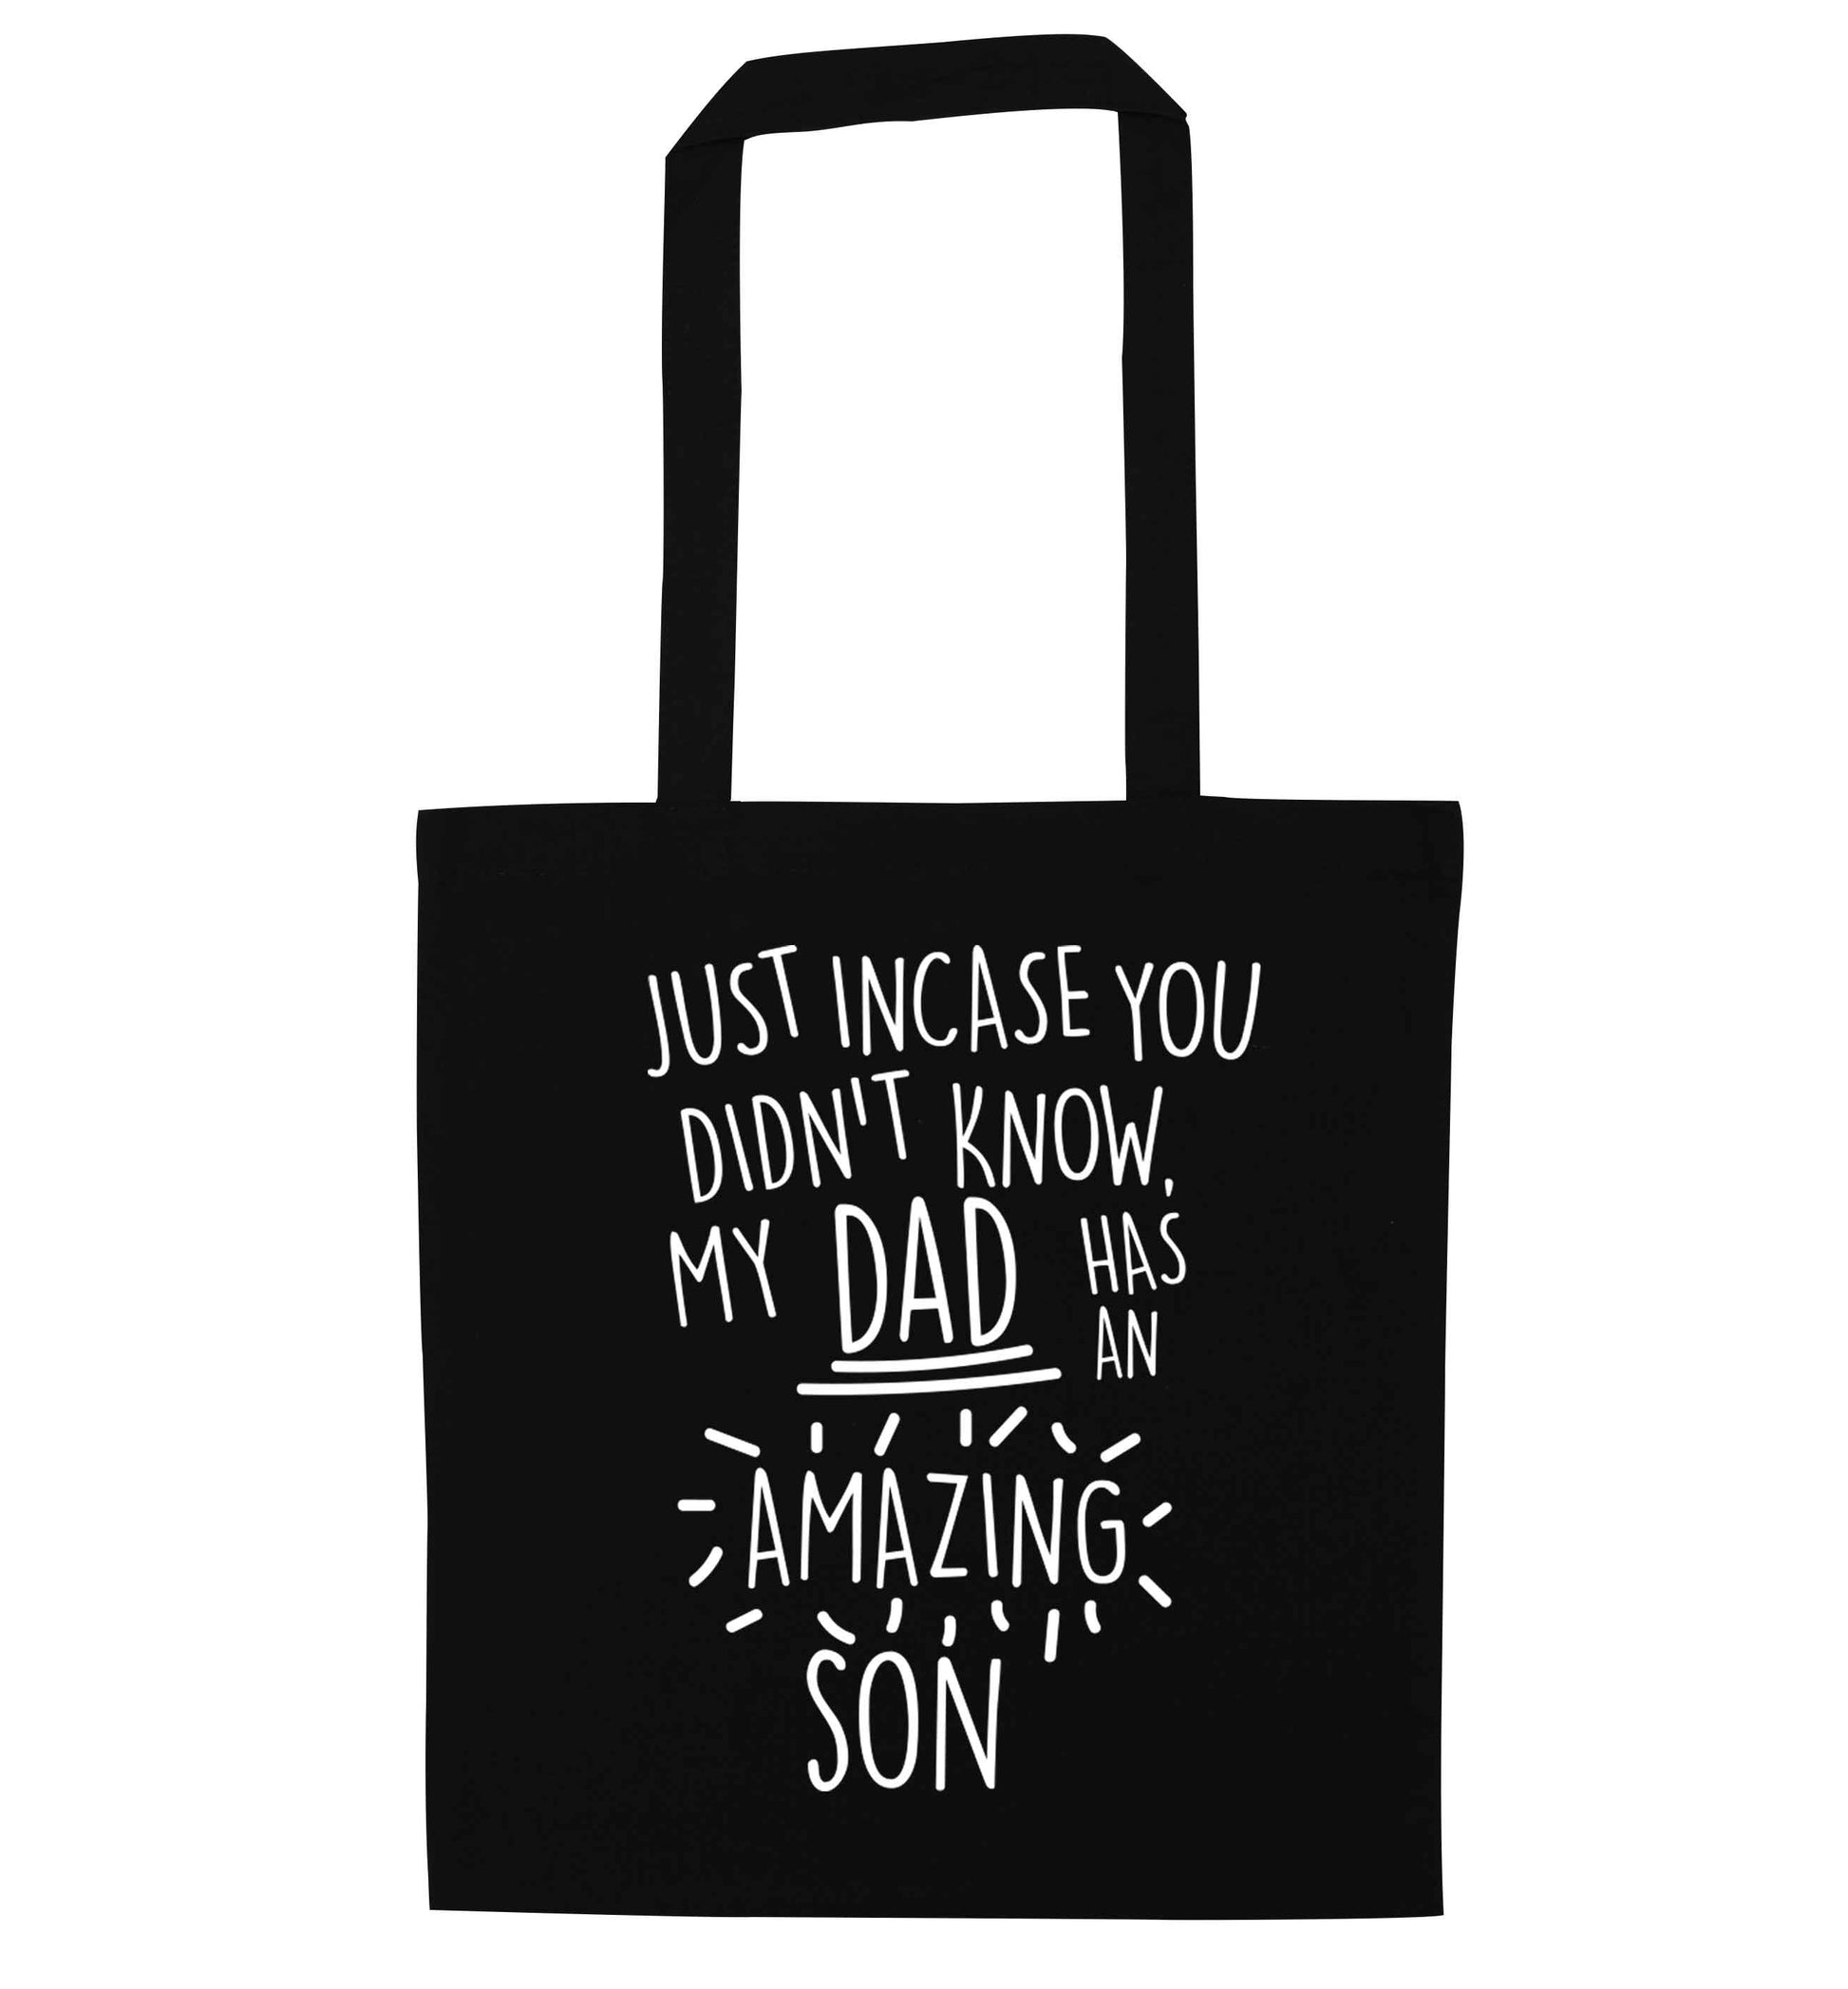 Just incase you didn't know my dad has an amazing son black tote bag